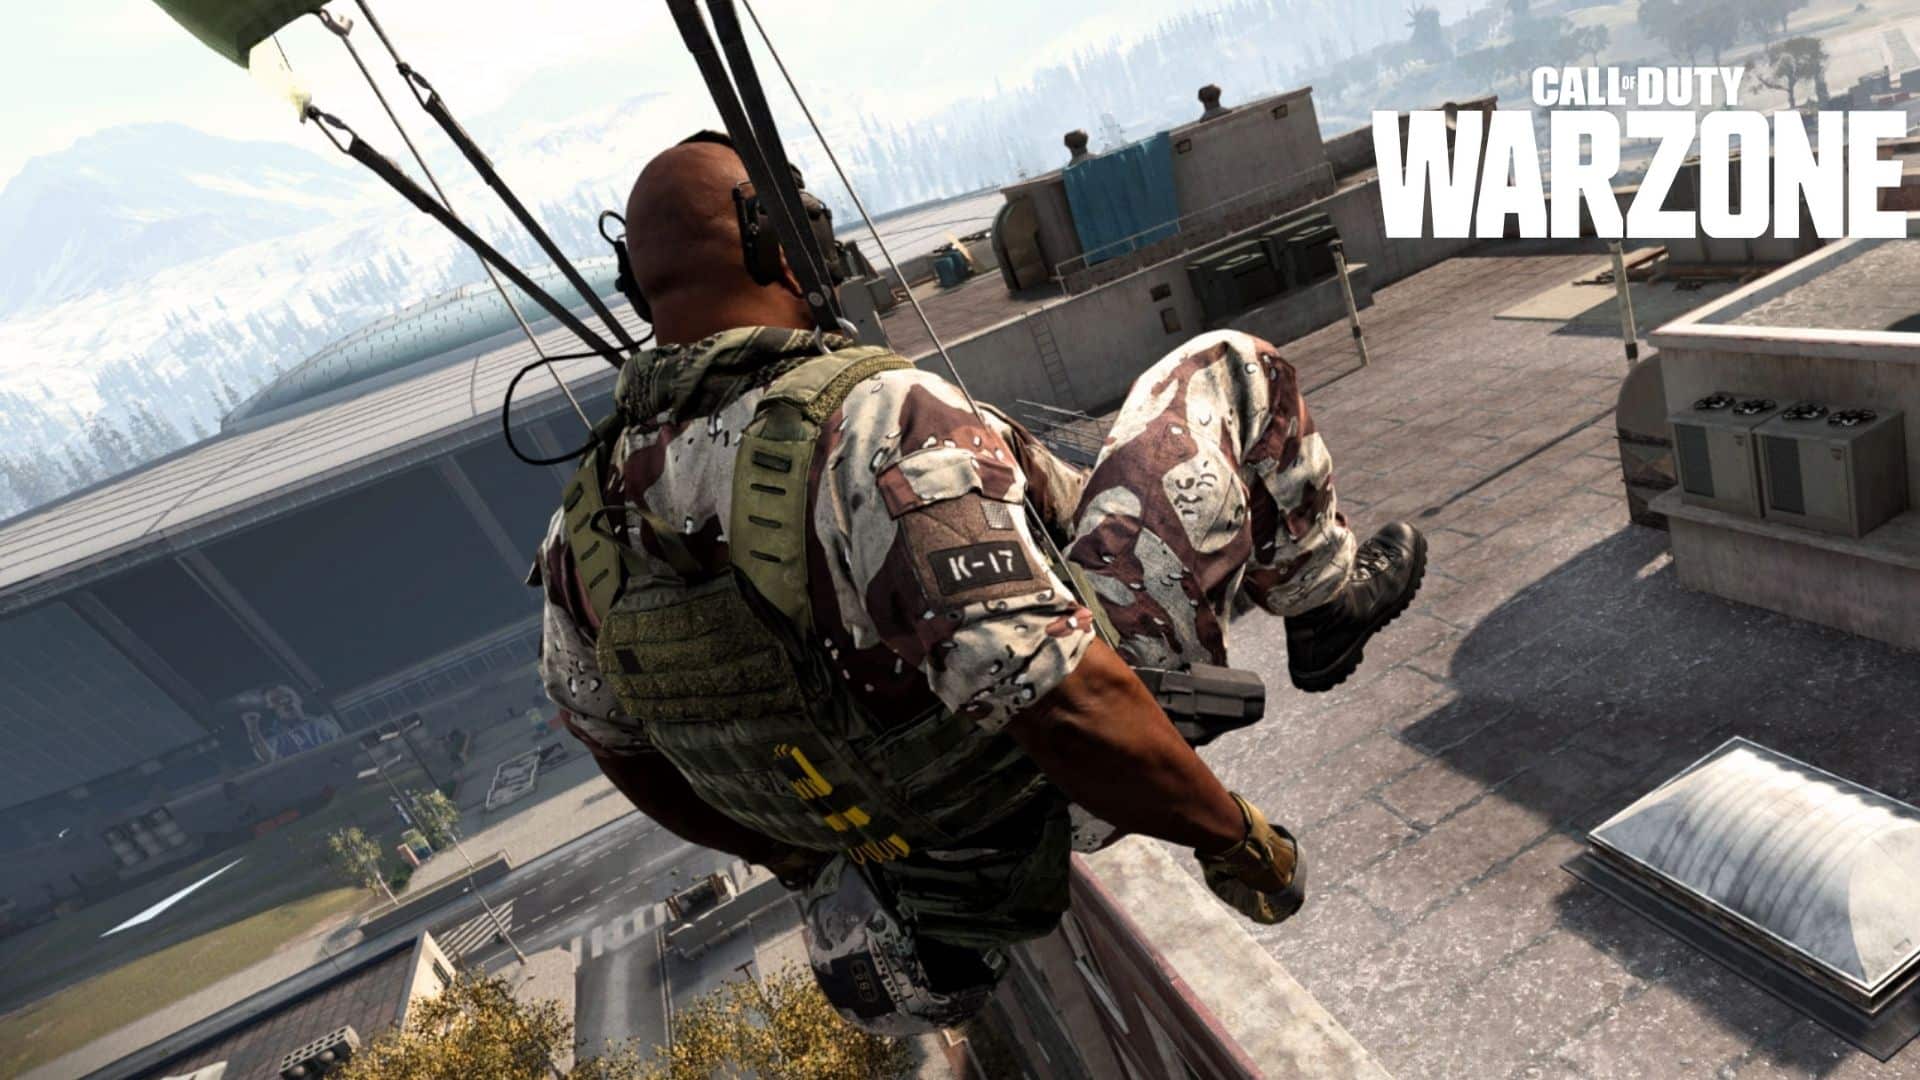 Warzone character parachuting into a location